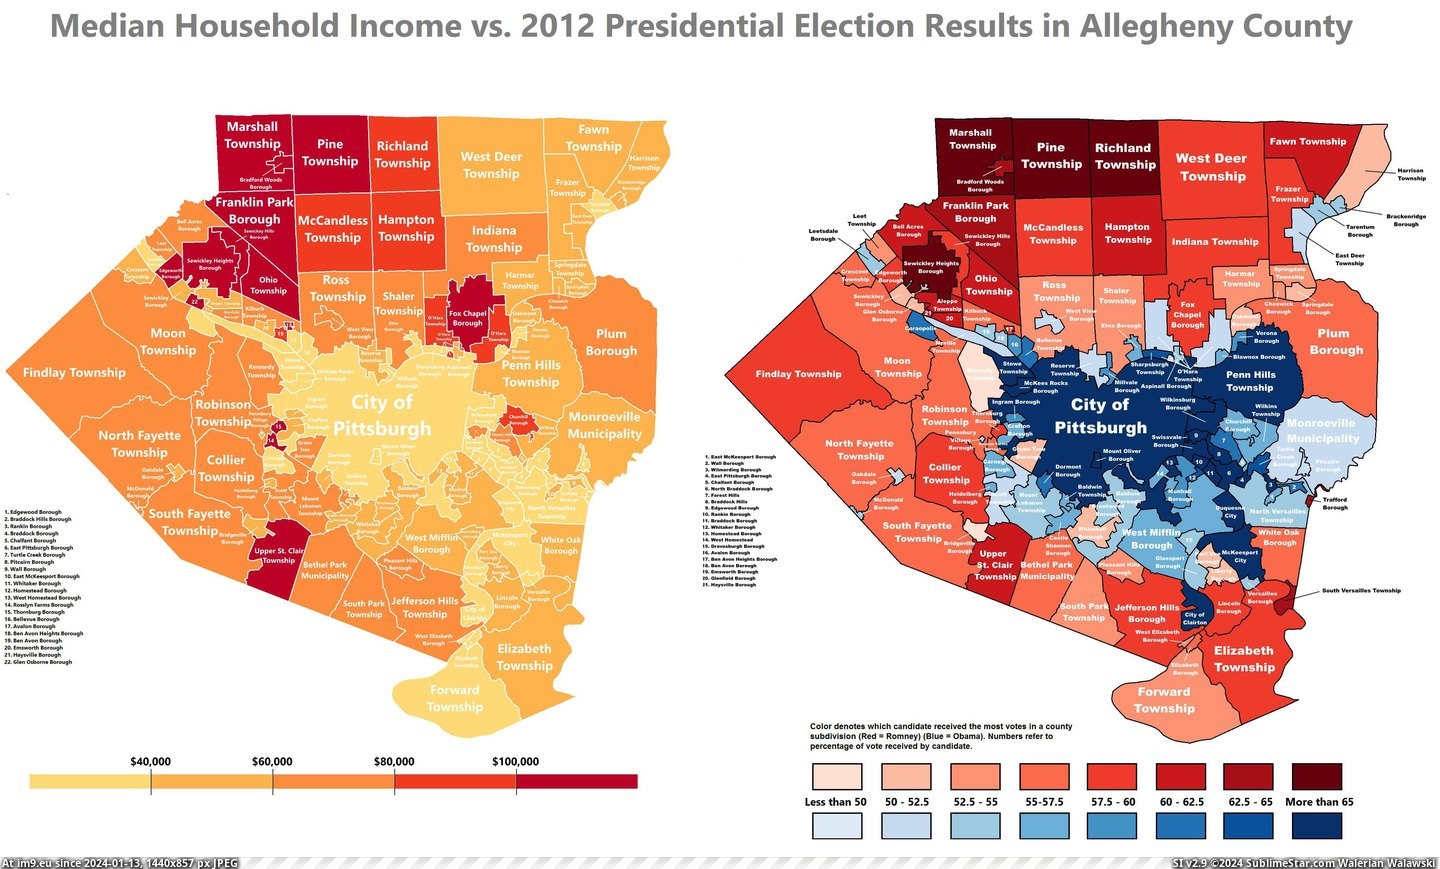 #County #Results #Elections #Pittsburgh #Household #Income #Presidential #Median [Mapporn] Median Household Income vs. 2012 Presidential Elections Results in Allegheny County (Pittsburgh) [4232x2532] Pic. (Bild von album My r/MAPS favs))